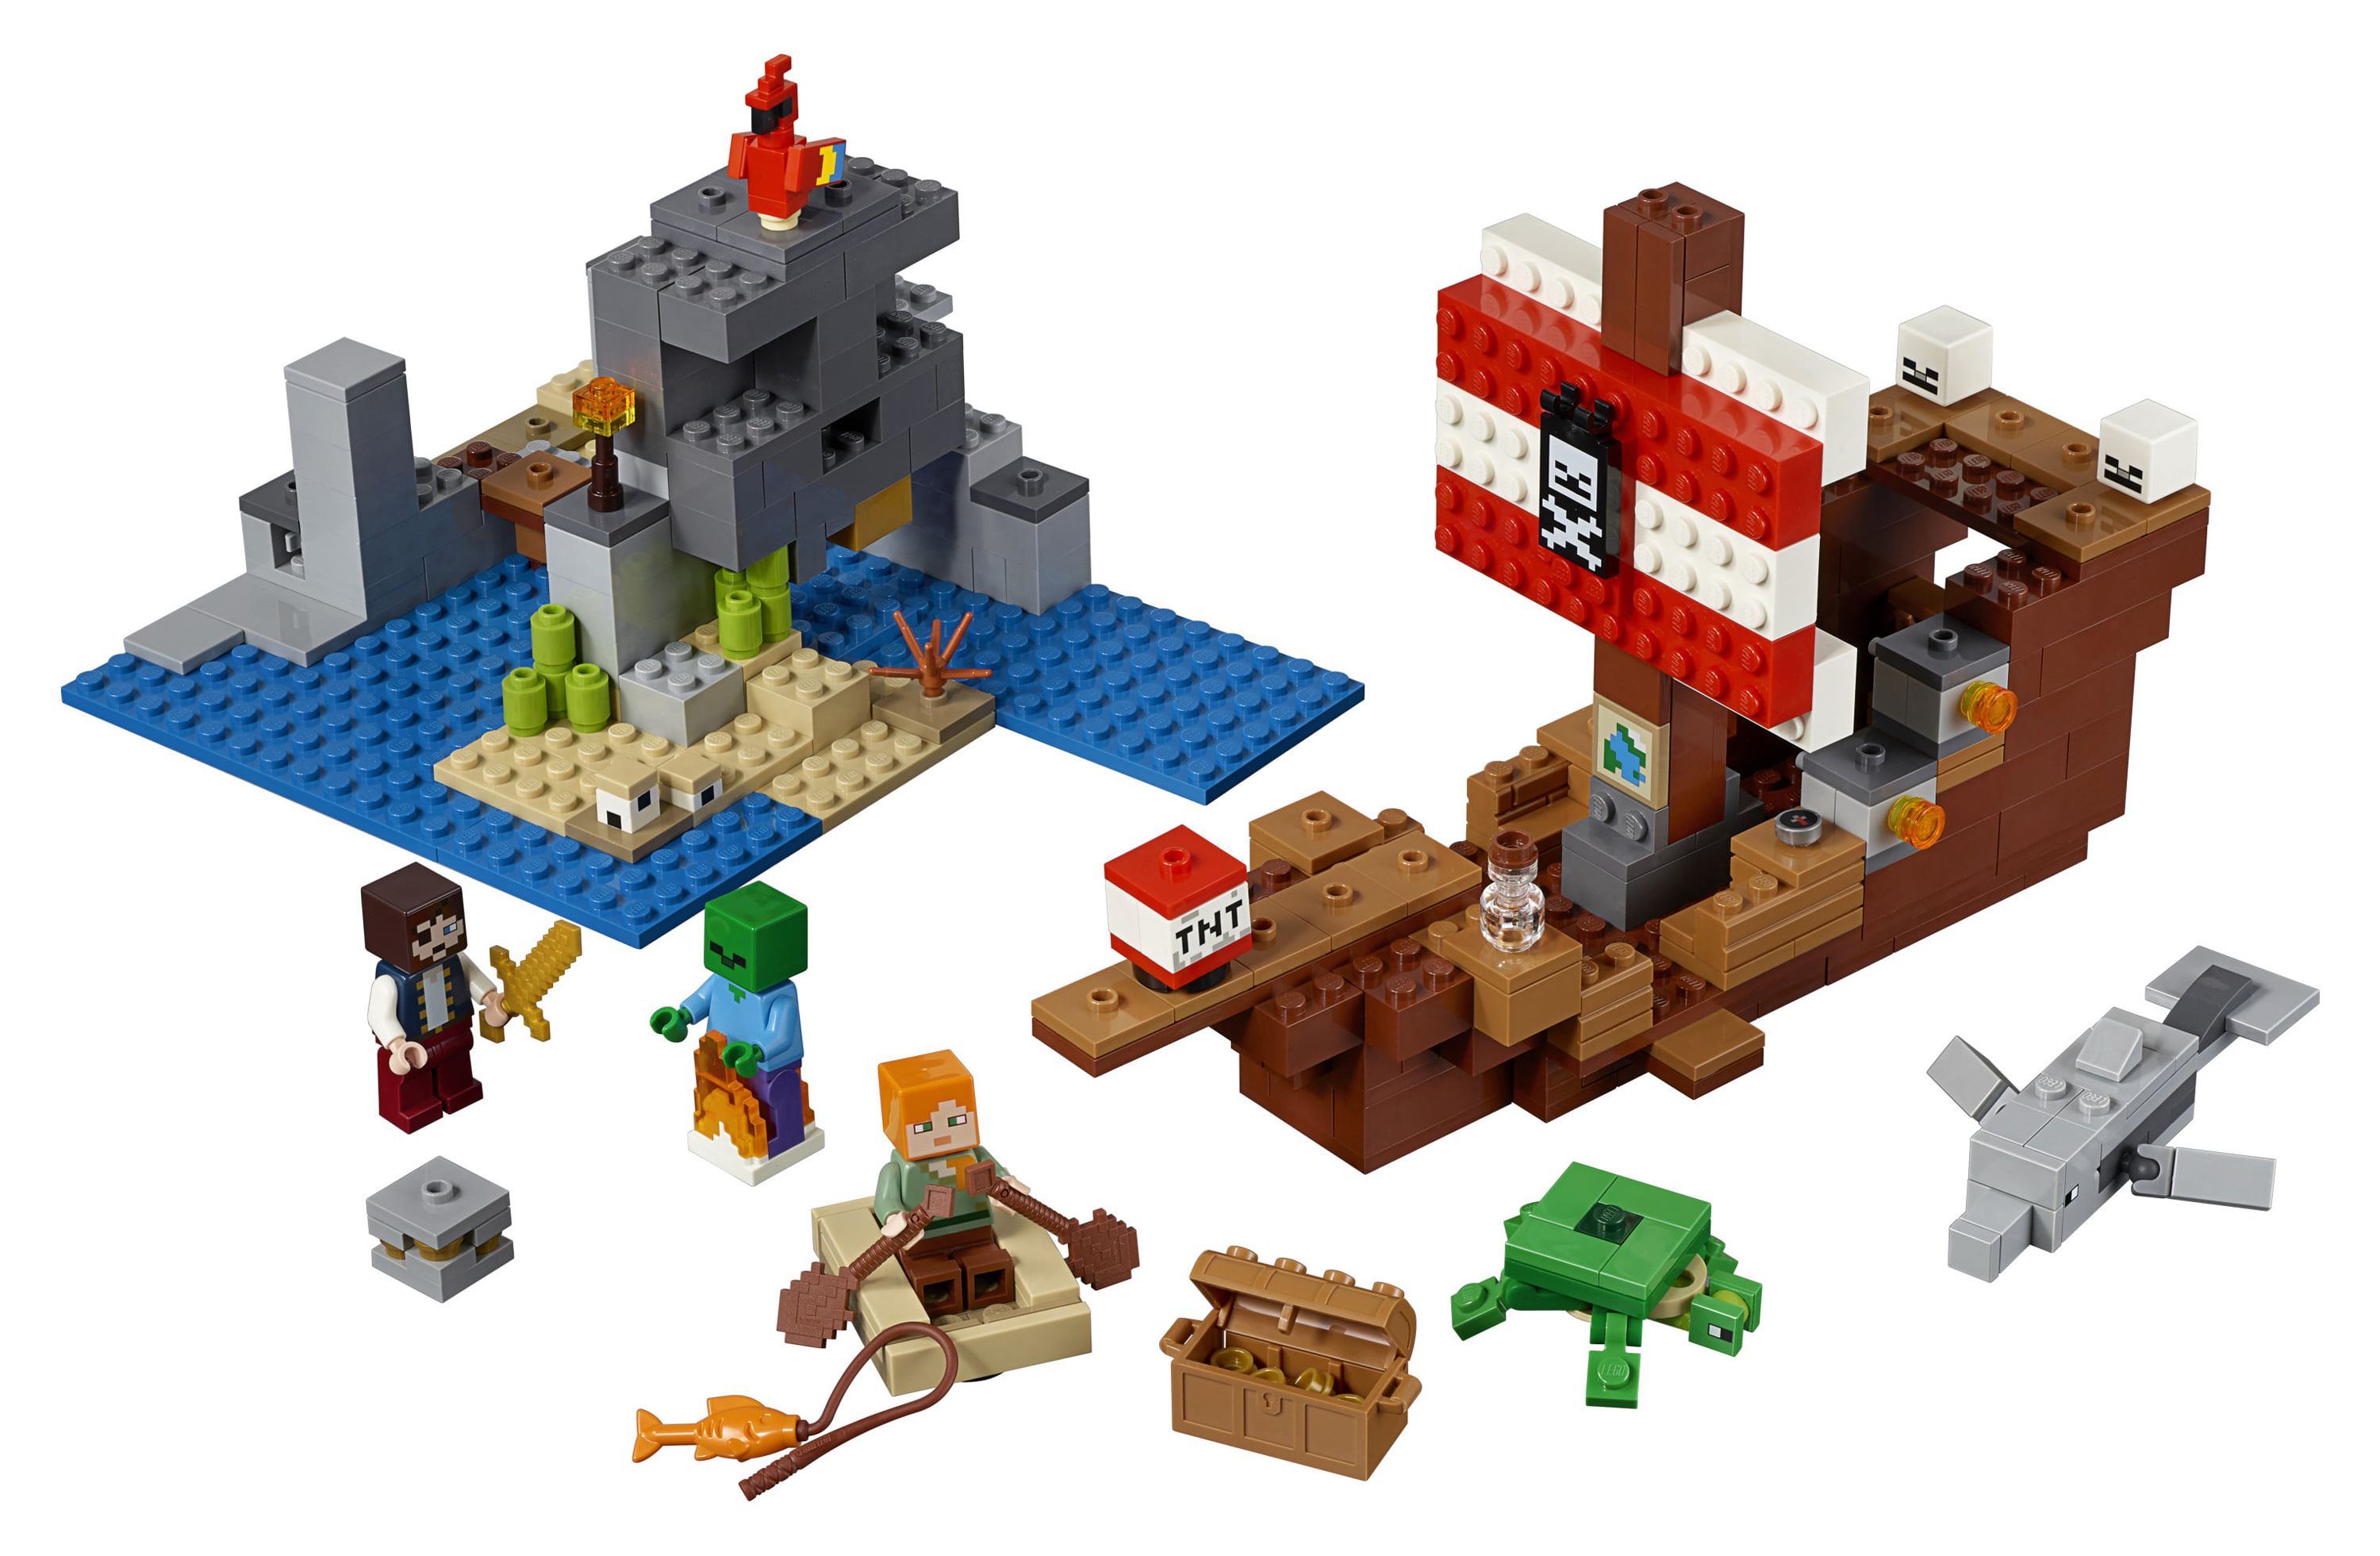 LEGO Minecraft The Pirate Ship Adventure 21152 Pirate Ship Boat Shark Treasure Chest Building Toy Kit (386 Pieces) - image 3 of 6